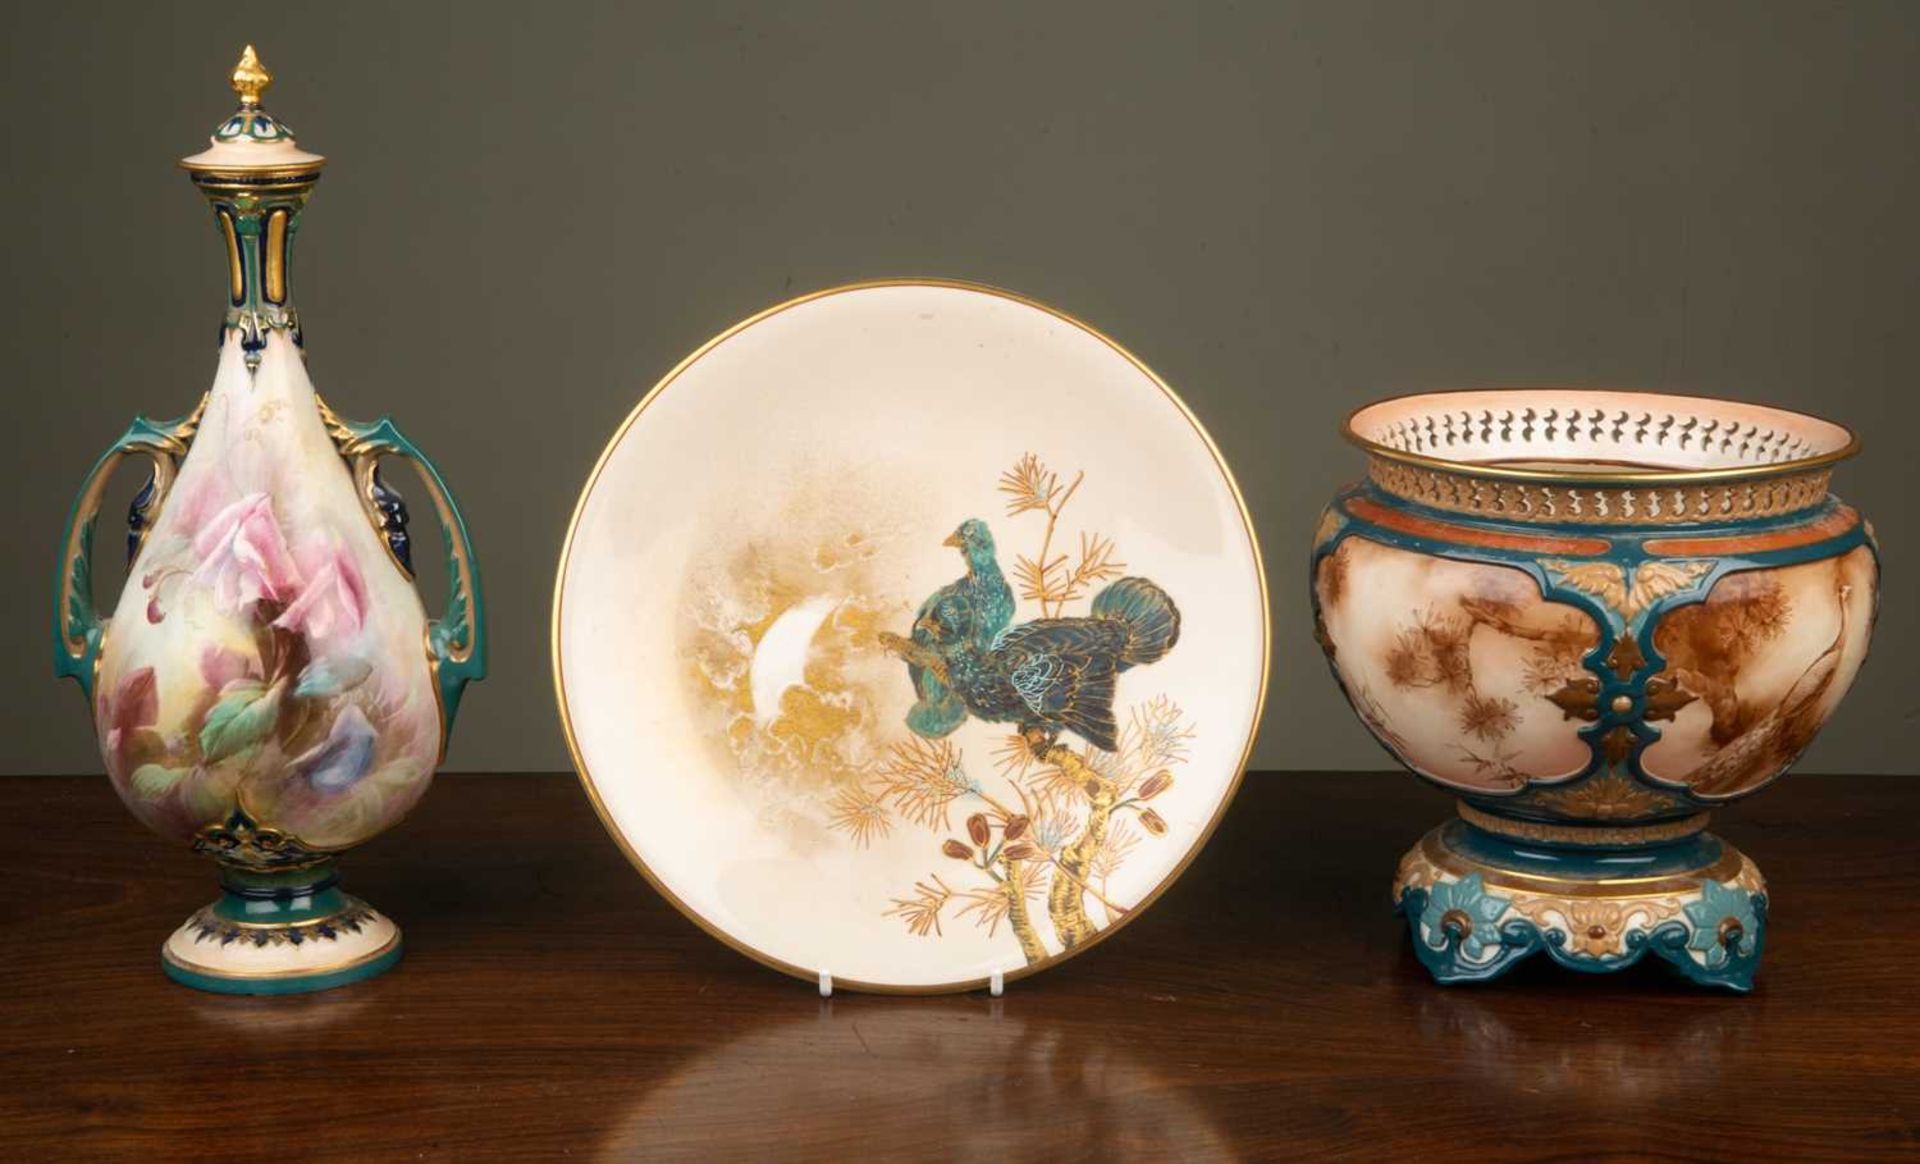 A Hadley's Worcester porcelain jardiniere with pierced rim and painted decoration of peacocks in